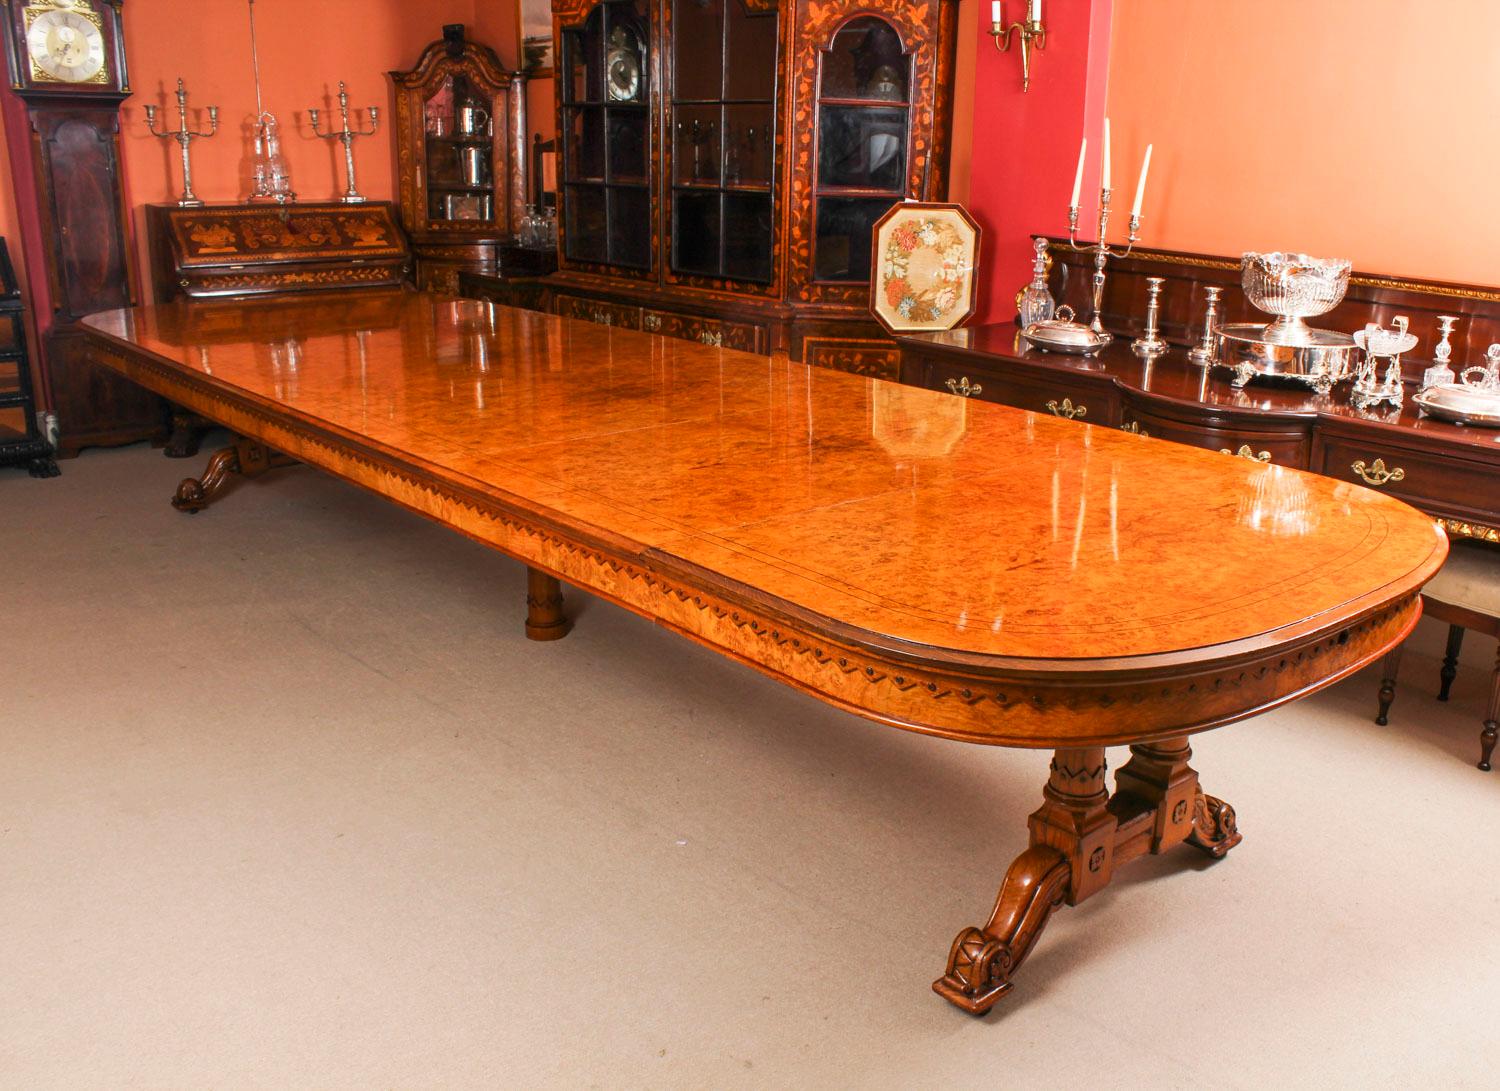 There is no mistaking the style and design of this exquisite dining set comprising an antique Victorian pollard oak and black line inlaid extending dining table, circa 1870 in date with a bespoke set of sixteen dining chairs.

This stunning table